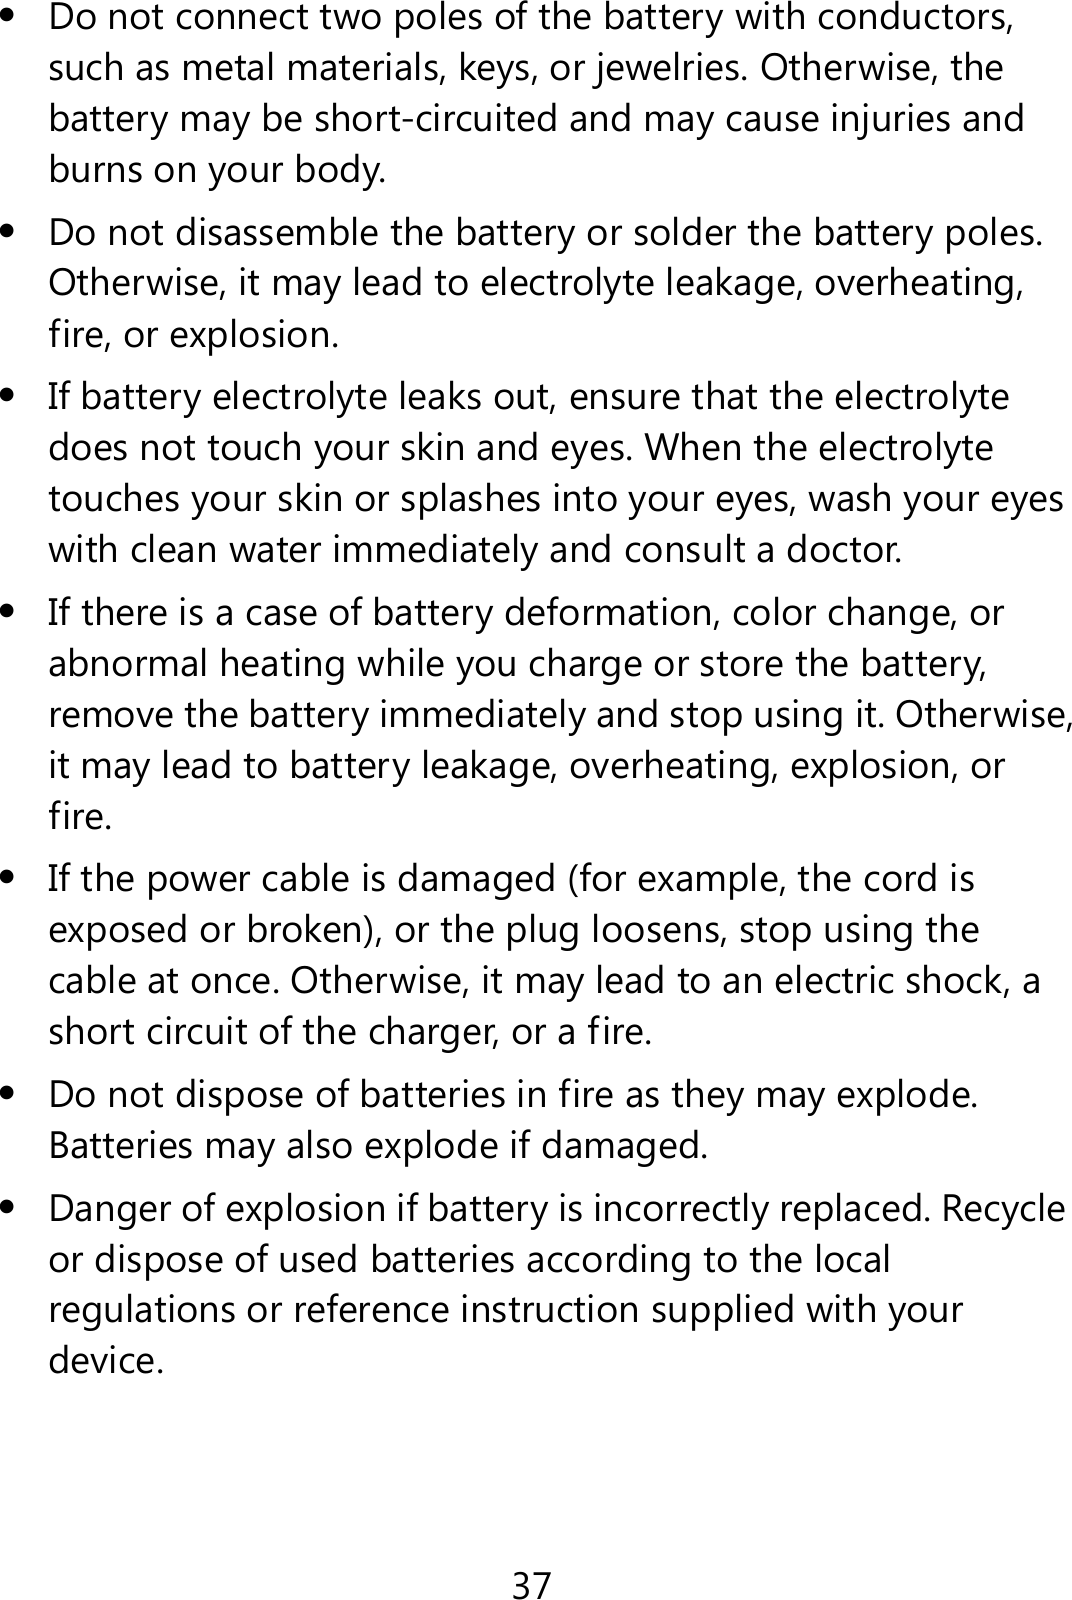 37  Do not connect two poles of the battery with conductors, such as metal materials, keys, or jewelries. Otherwise, the battery may be short-circuited and may cause injuries and burns on your body.  Do not disassemble the battery or solder the battery poles. Otherwise, it may lead to electrolyte leakage, overheating, fire, or explosion.  If battery electrolyte leaks out, ensure that the electrolyte does not touch your skin and eyes. When the electrolyte touches your skin or splashes into your eyes, wash your eyes with clean water immediately and consult a doctor.  If there is a case of battery deformation, color change, or abnormal heating while you charge or store the battery, remove the battery immediately and stop using it. Otherwise, it may lead to battery leakage, overheating, explosion, or fire.  If the power cable is damaged (for example, the cord is exposed or broken), or the plug loosens, stop using the cable at once. Otherwise, it may lead to an electric shock, a short circuit of the charger, or a fire.  Do not dispose of batteries in fire as they may explode. Batteries may also explode if damaged.  Danger of explosion if battery is incorrectly replaced. Recycle or dispose of used batteries according to the local regulations or reference instruction supplied with your device. 